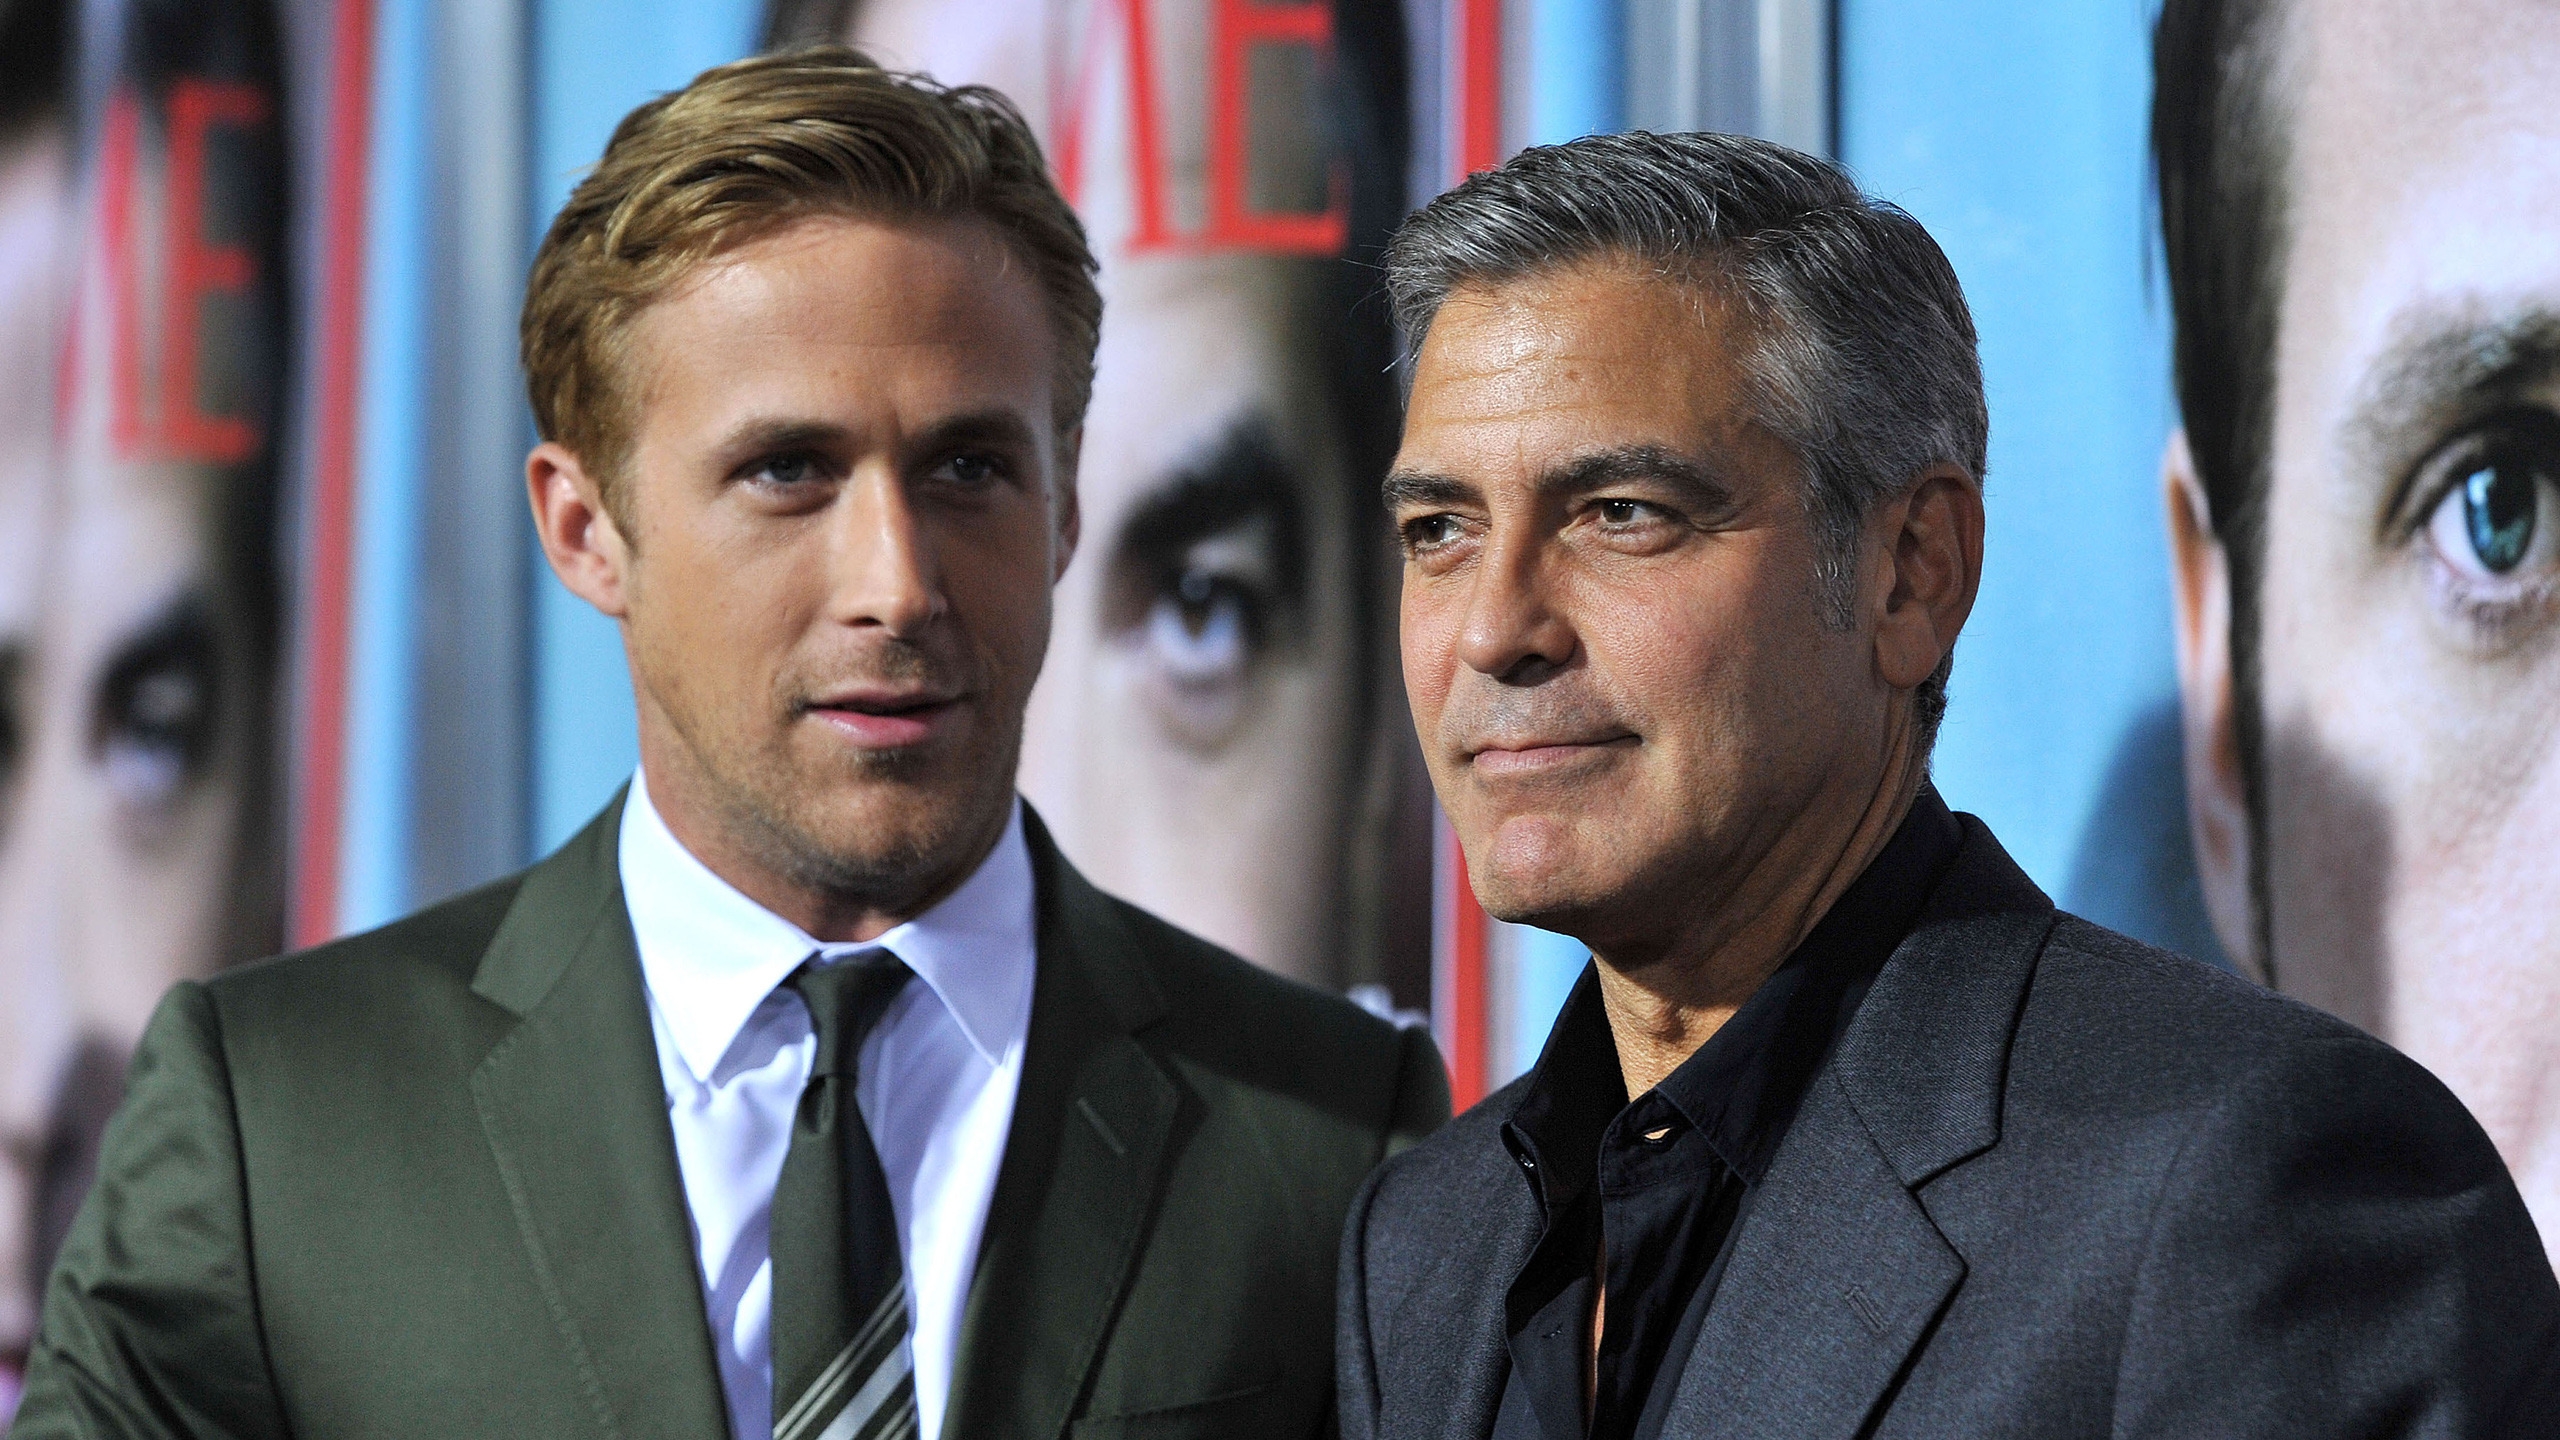 George Clooney and Ryan Gosling for 2560x1440 HDTV resolution